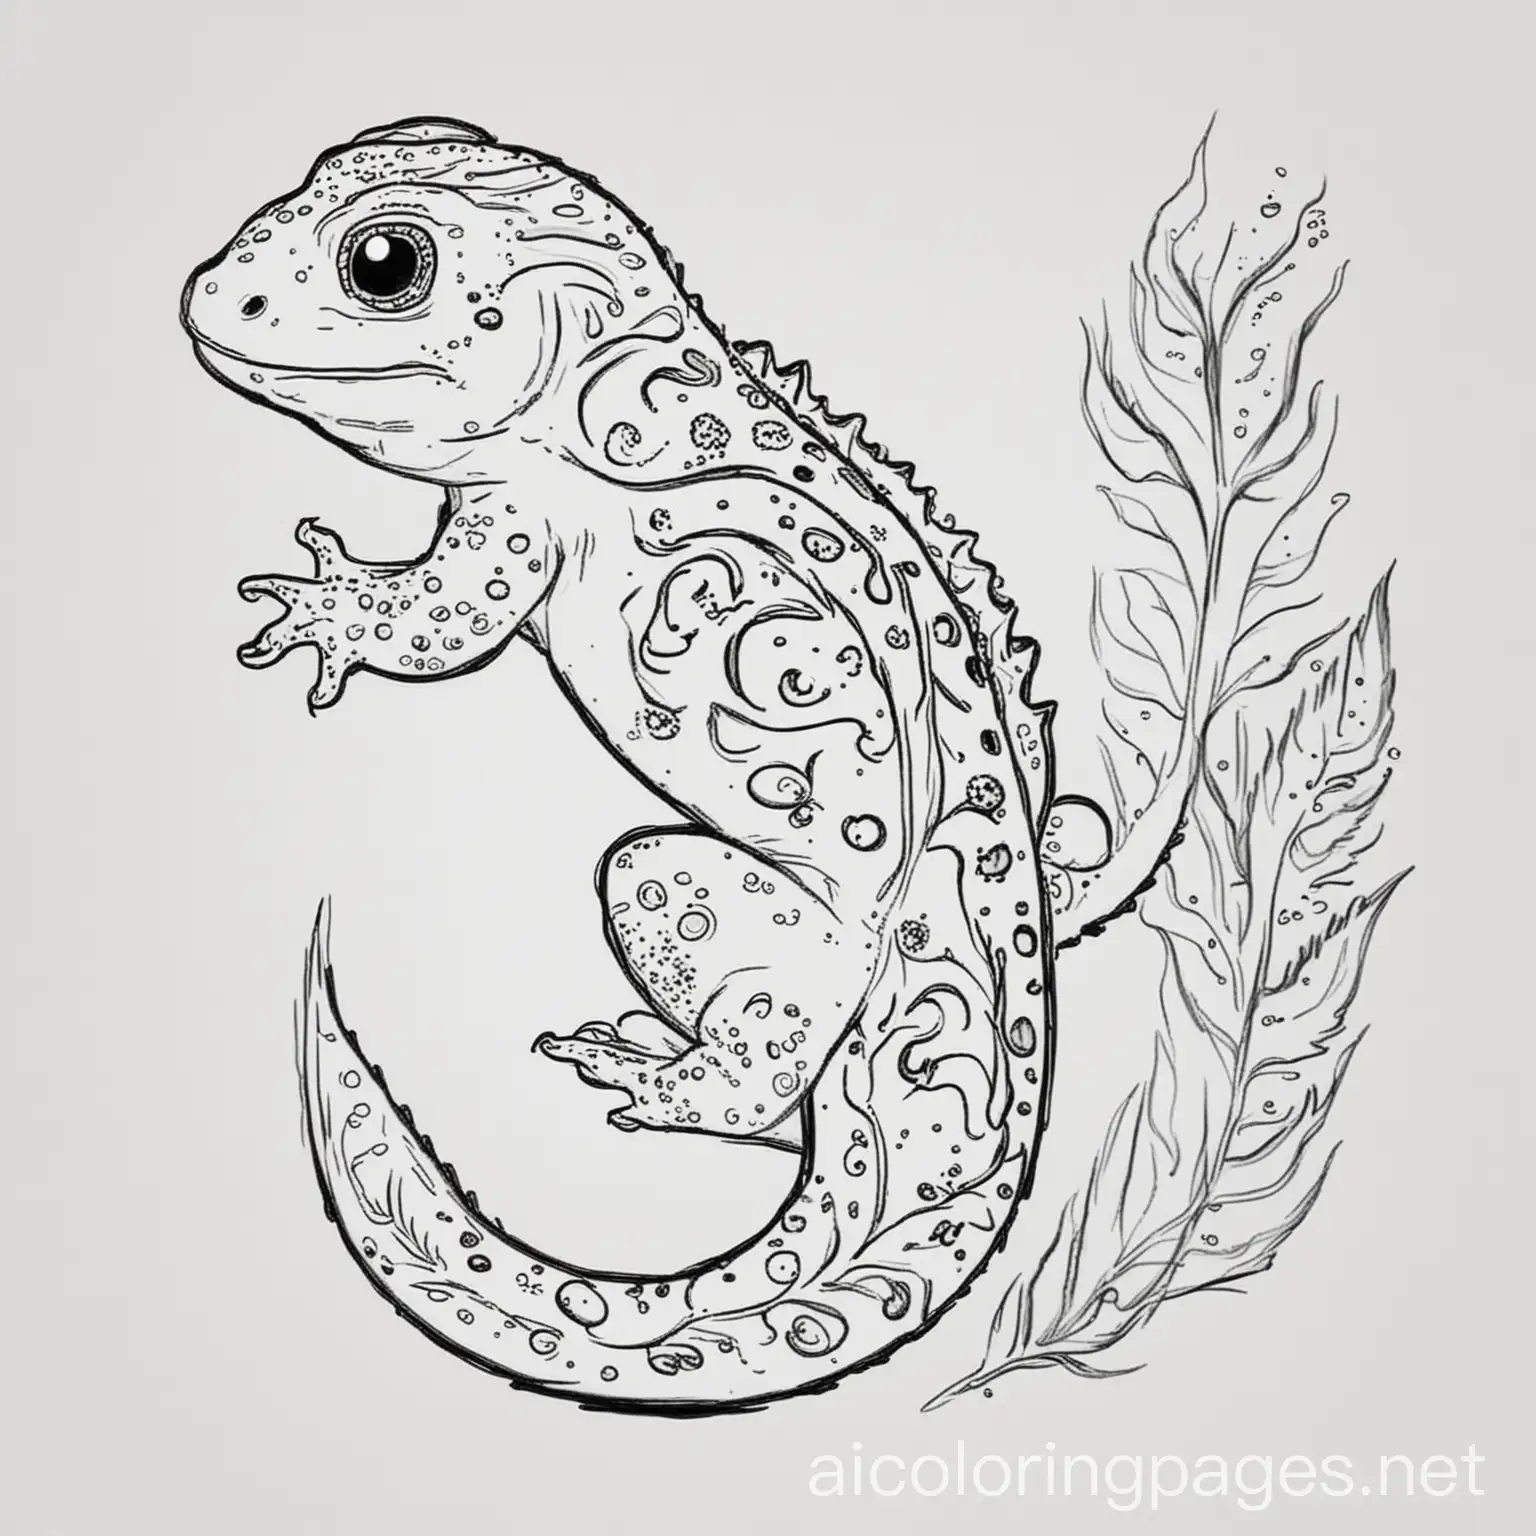 salamander coloring sheet, Coloring Page, black and white, line art, white background, Simplicity, Ample White Space. The background of the coloring page is plain white to make it easy for young children to color within the lines. The outlines of all the subjects are easy to distinguish, making it simple for kids to color without too much difficulty